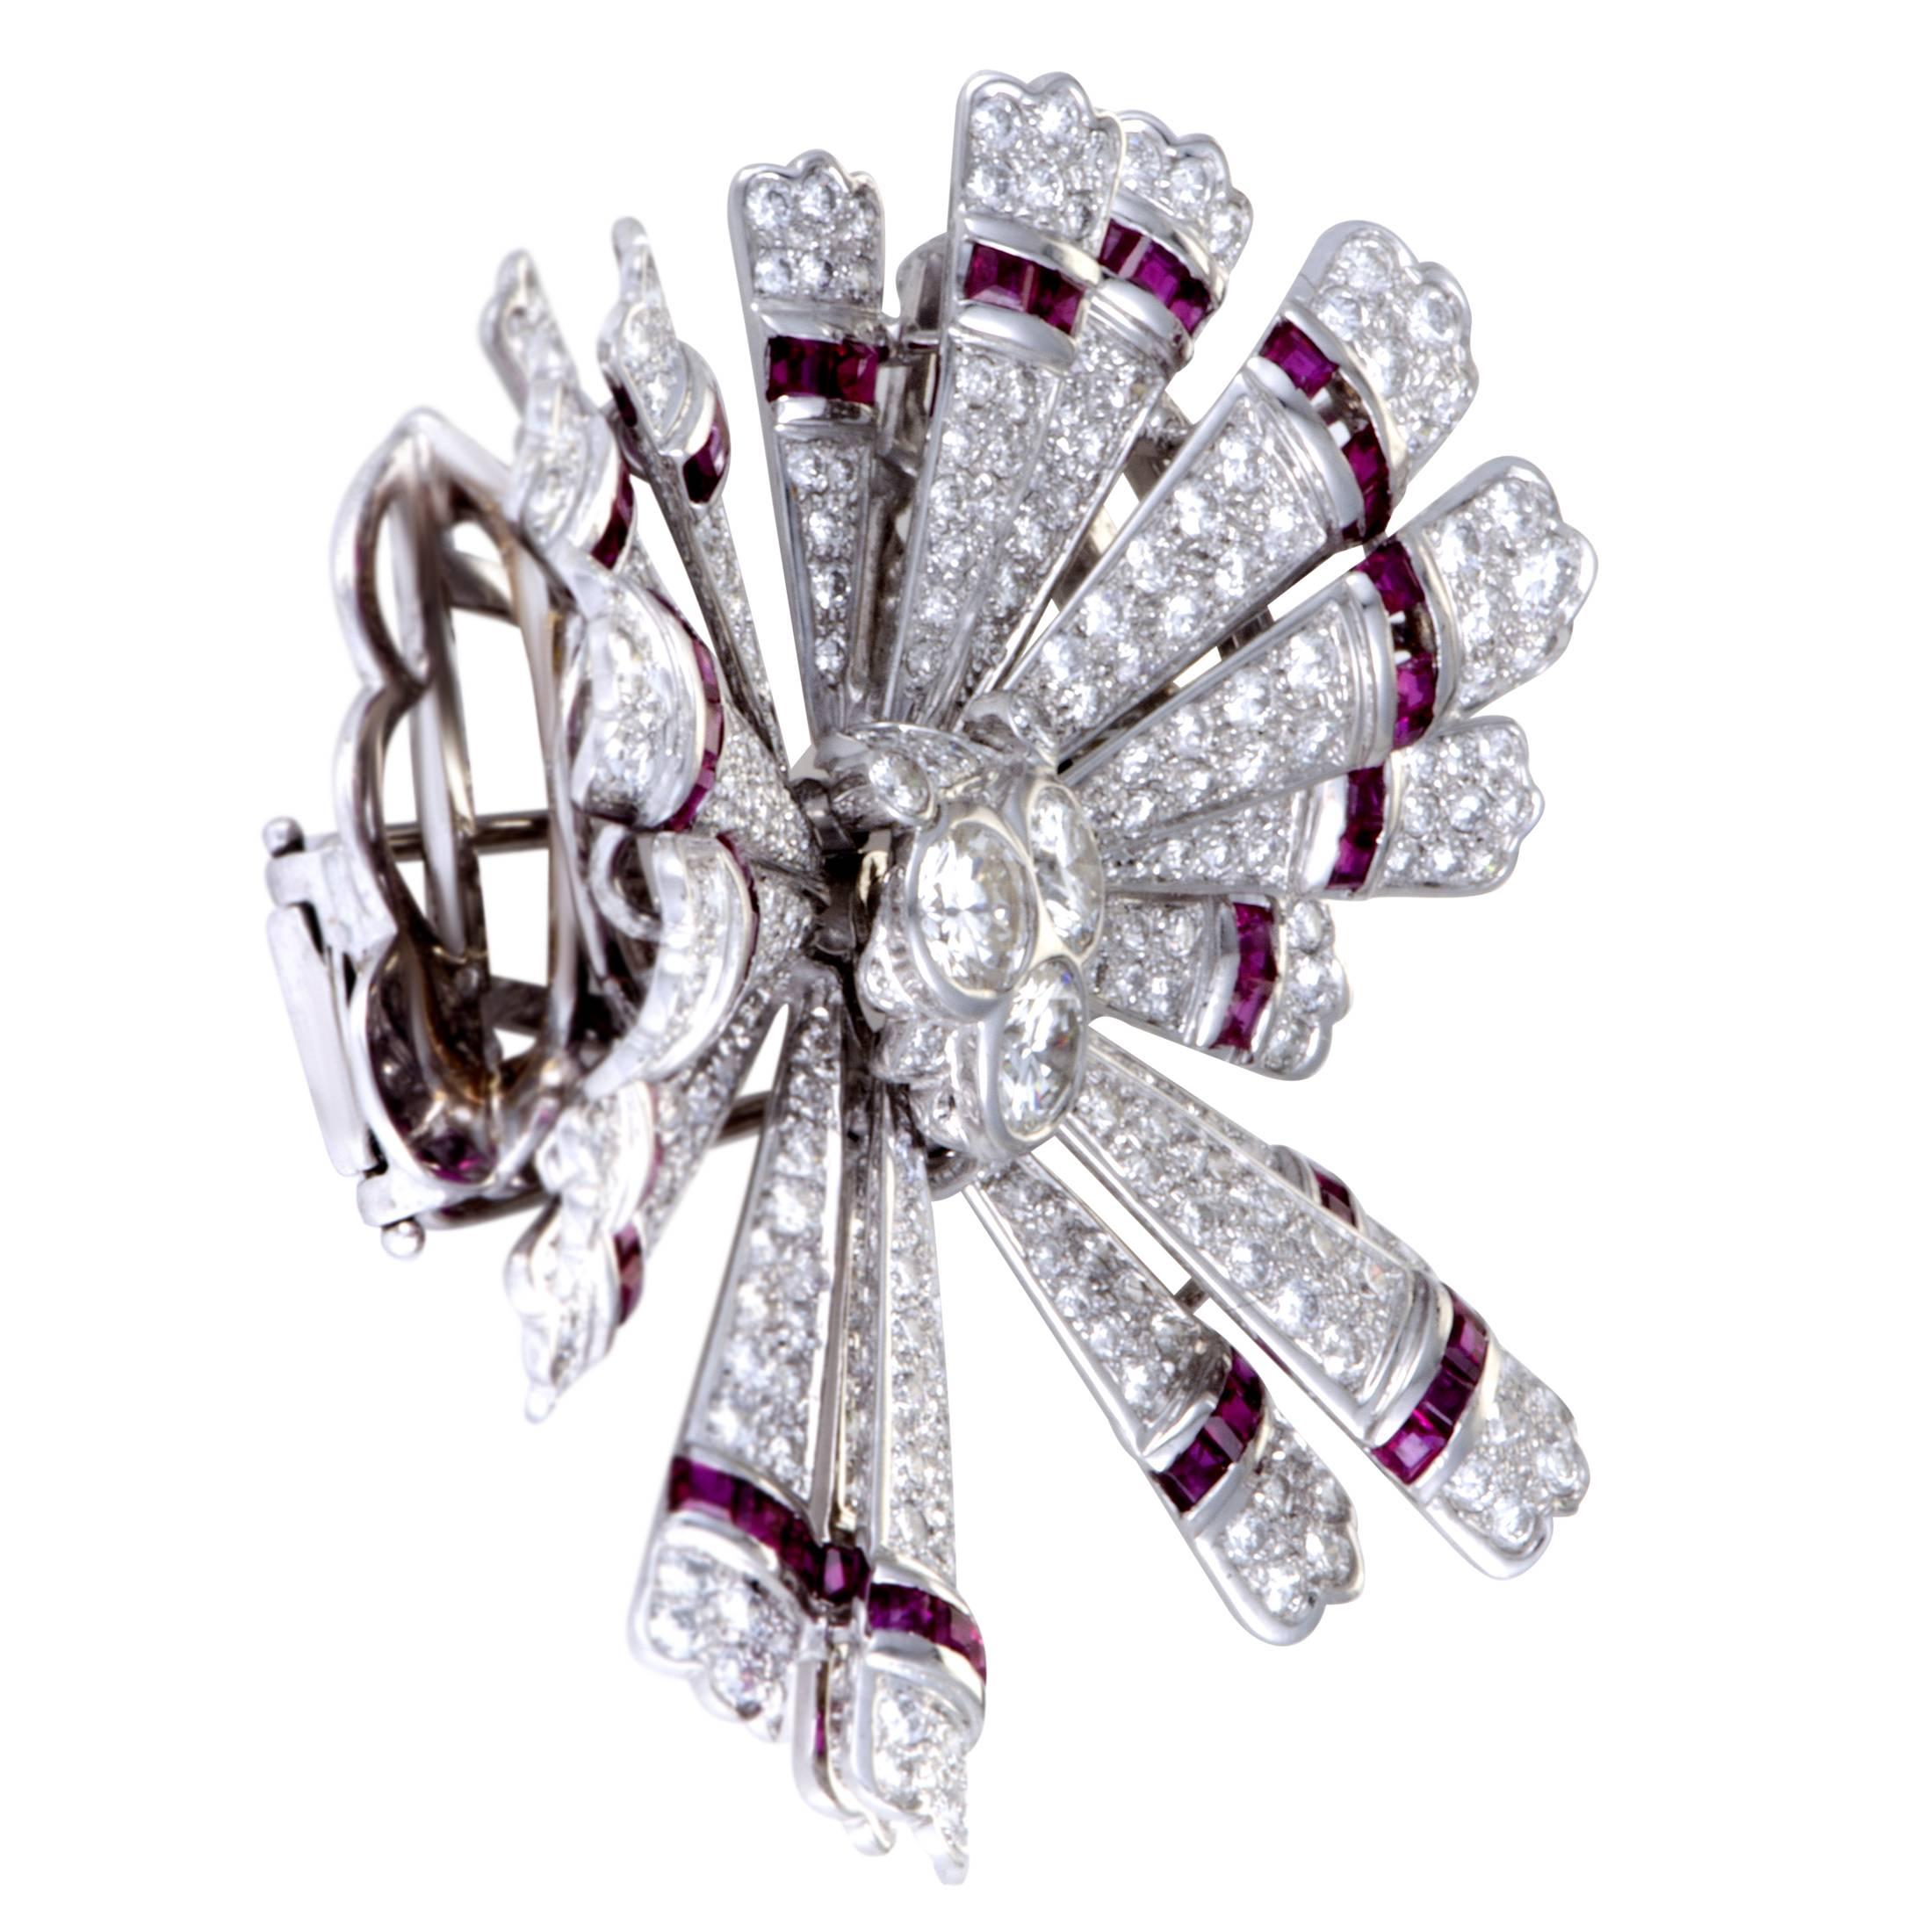 Beautifully crafted in shimmering 18K white gold, this gorgeous brooches by Teone is absolutely exemplary in design and style. The stunning broche is completely embellished in 5.65ct of sparkling diamonds and 2.82ct of exquisite rubies that